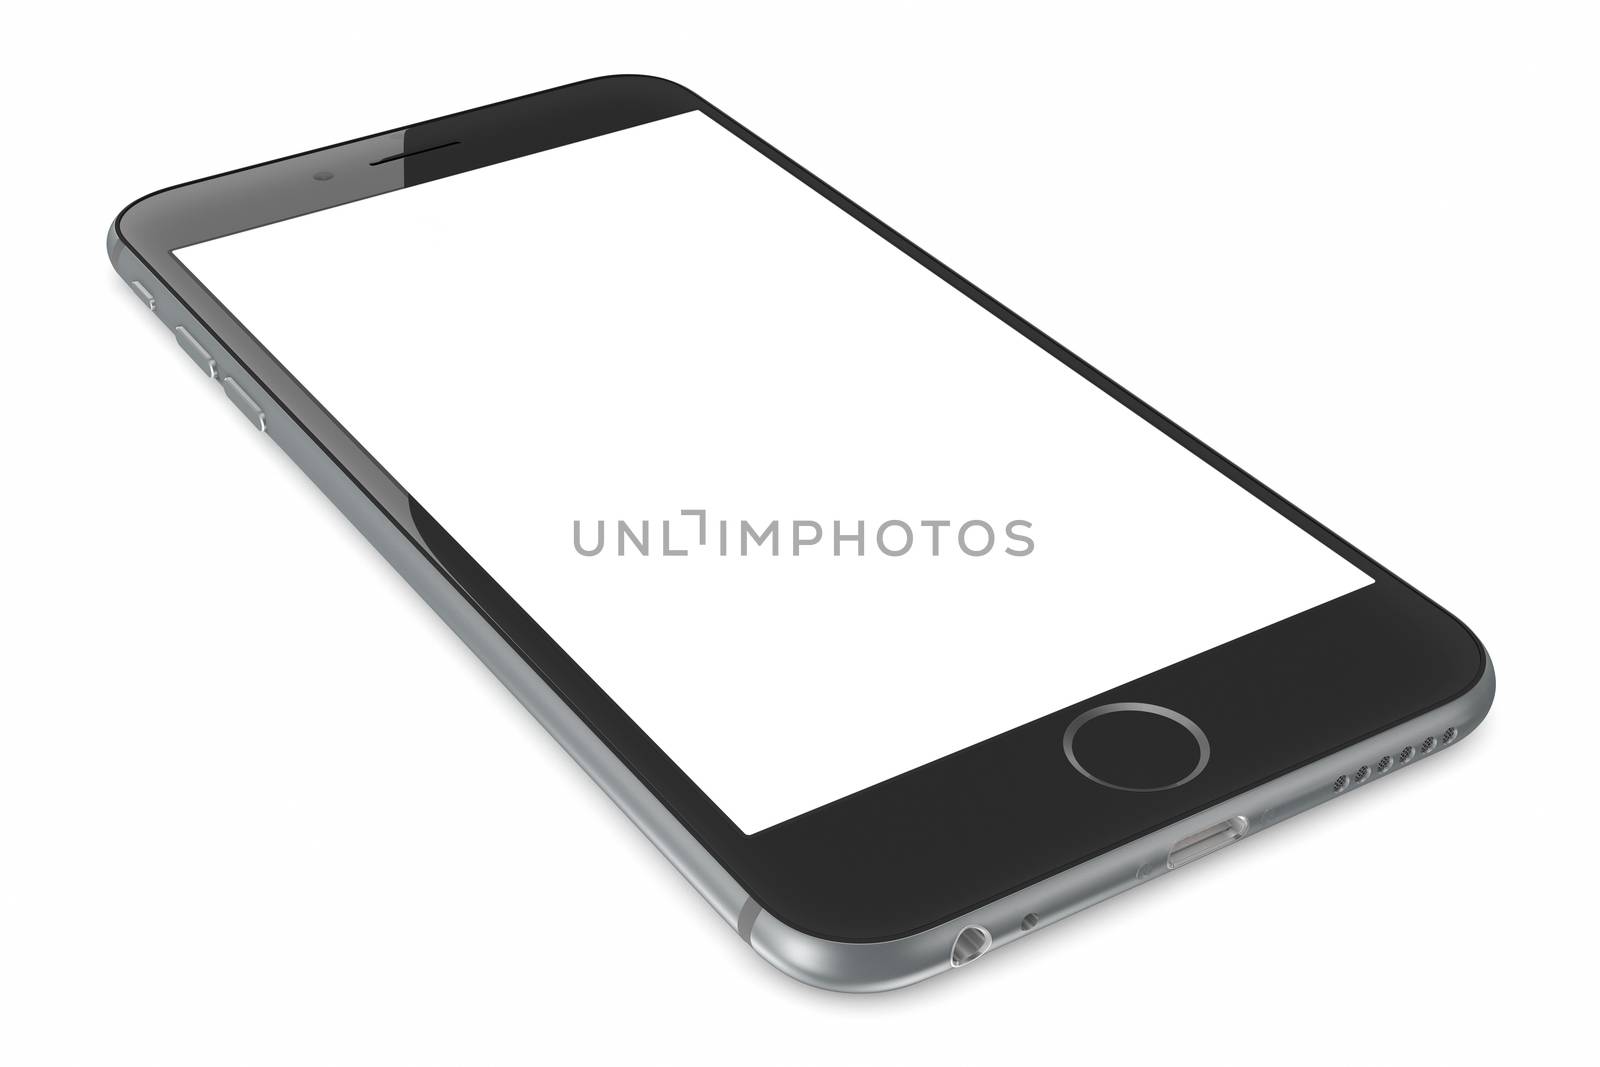 Galati, Romania - September 18, 2014: Apple Space Gray iPhone 6 Plus with white blank screen.The new iPhone with higher-resolution 4.7 and 5.5-inch screens, improved cameras, new sensors, a dedicated NFC chip for mobile payments. Apple released the iPhone 6 and iPhone 6 Plus on September 9, 2014.